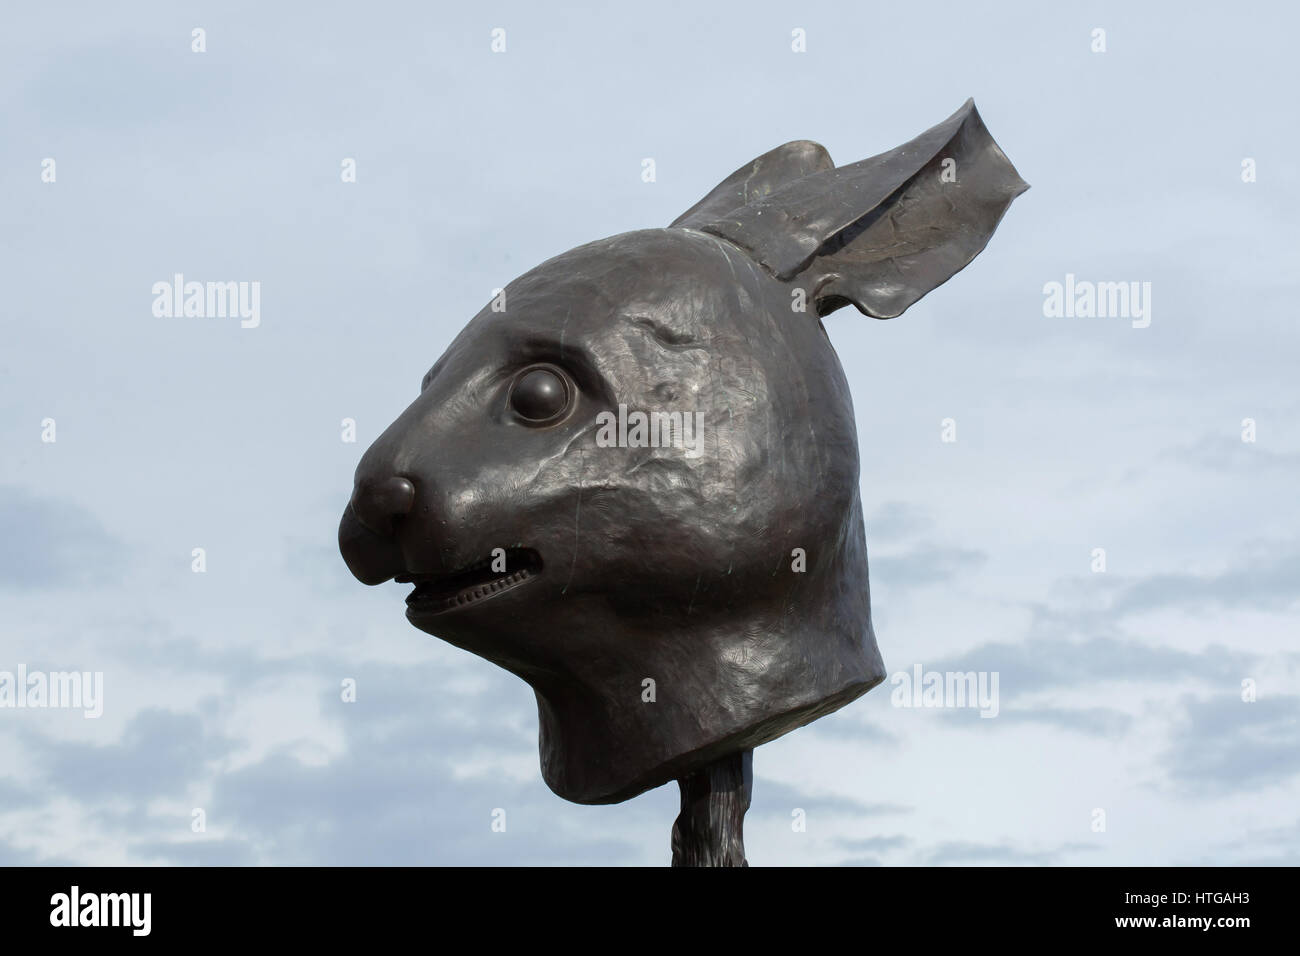 Rabbit. Circle of Animals (Zodiac Heads) by Chinese contemporary artist Ai Weiwei (2010) on display in the Belvedere gardens in Vienna, Austria. Stock Photo